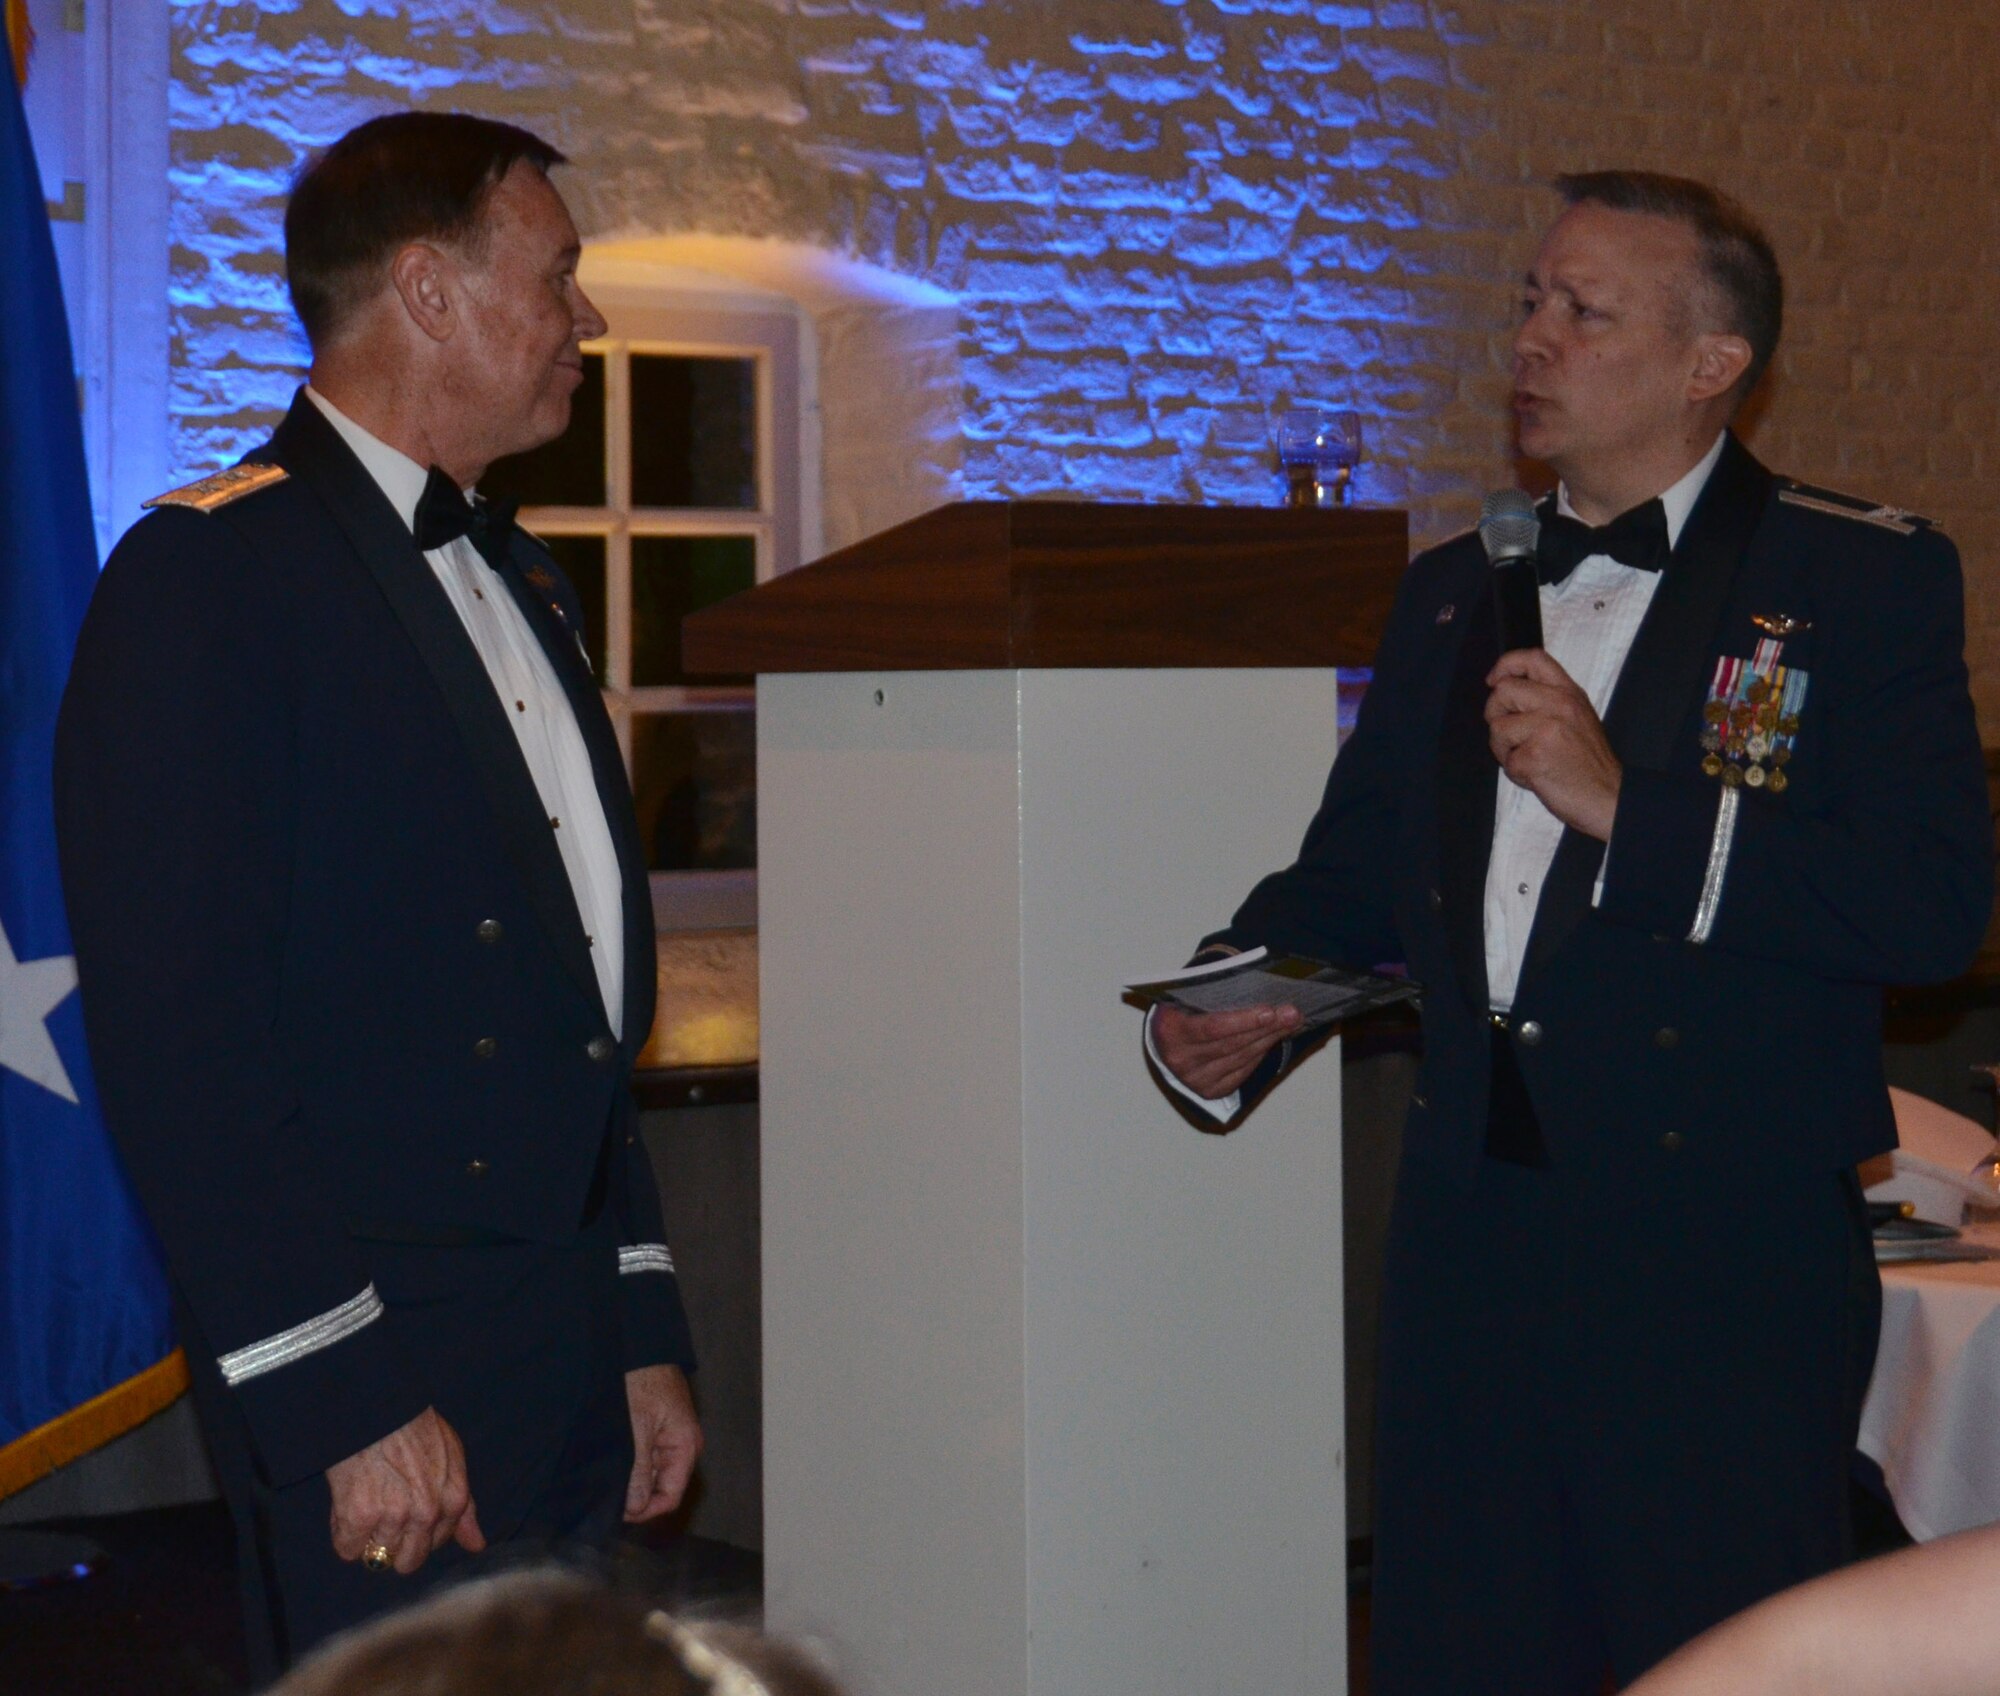 Colonel Frank D. Samuelson, commander of the E-3A Component's
Logistic Wing, speaks to Air Force District of Washington Commander Maj.
Gen. Darryl Burke at the Tri-Border U.S. Air Force Ball in Geilenkirchen,
Germany Oct. 9, 2015. Burke, Commander of NATO's E3-A Component Flying
Squadron One from 2001-2003, spoke about the rich history of the U.S. Air
Force and how Airmen of today are rising to the occasion to confront future
challenges. AFDW provides full-spectrum operational support including
personnel, legal, financial, contracting, and aircrew management to
approximately 26,000 Airmen across the globe. (Courtesy Photo)
